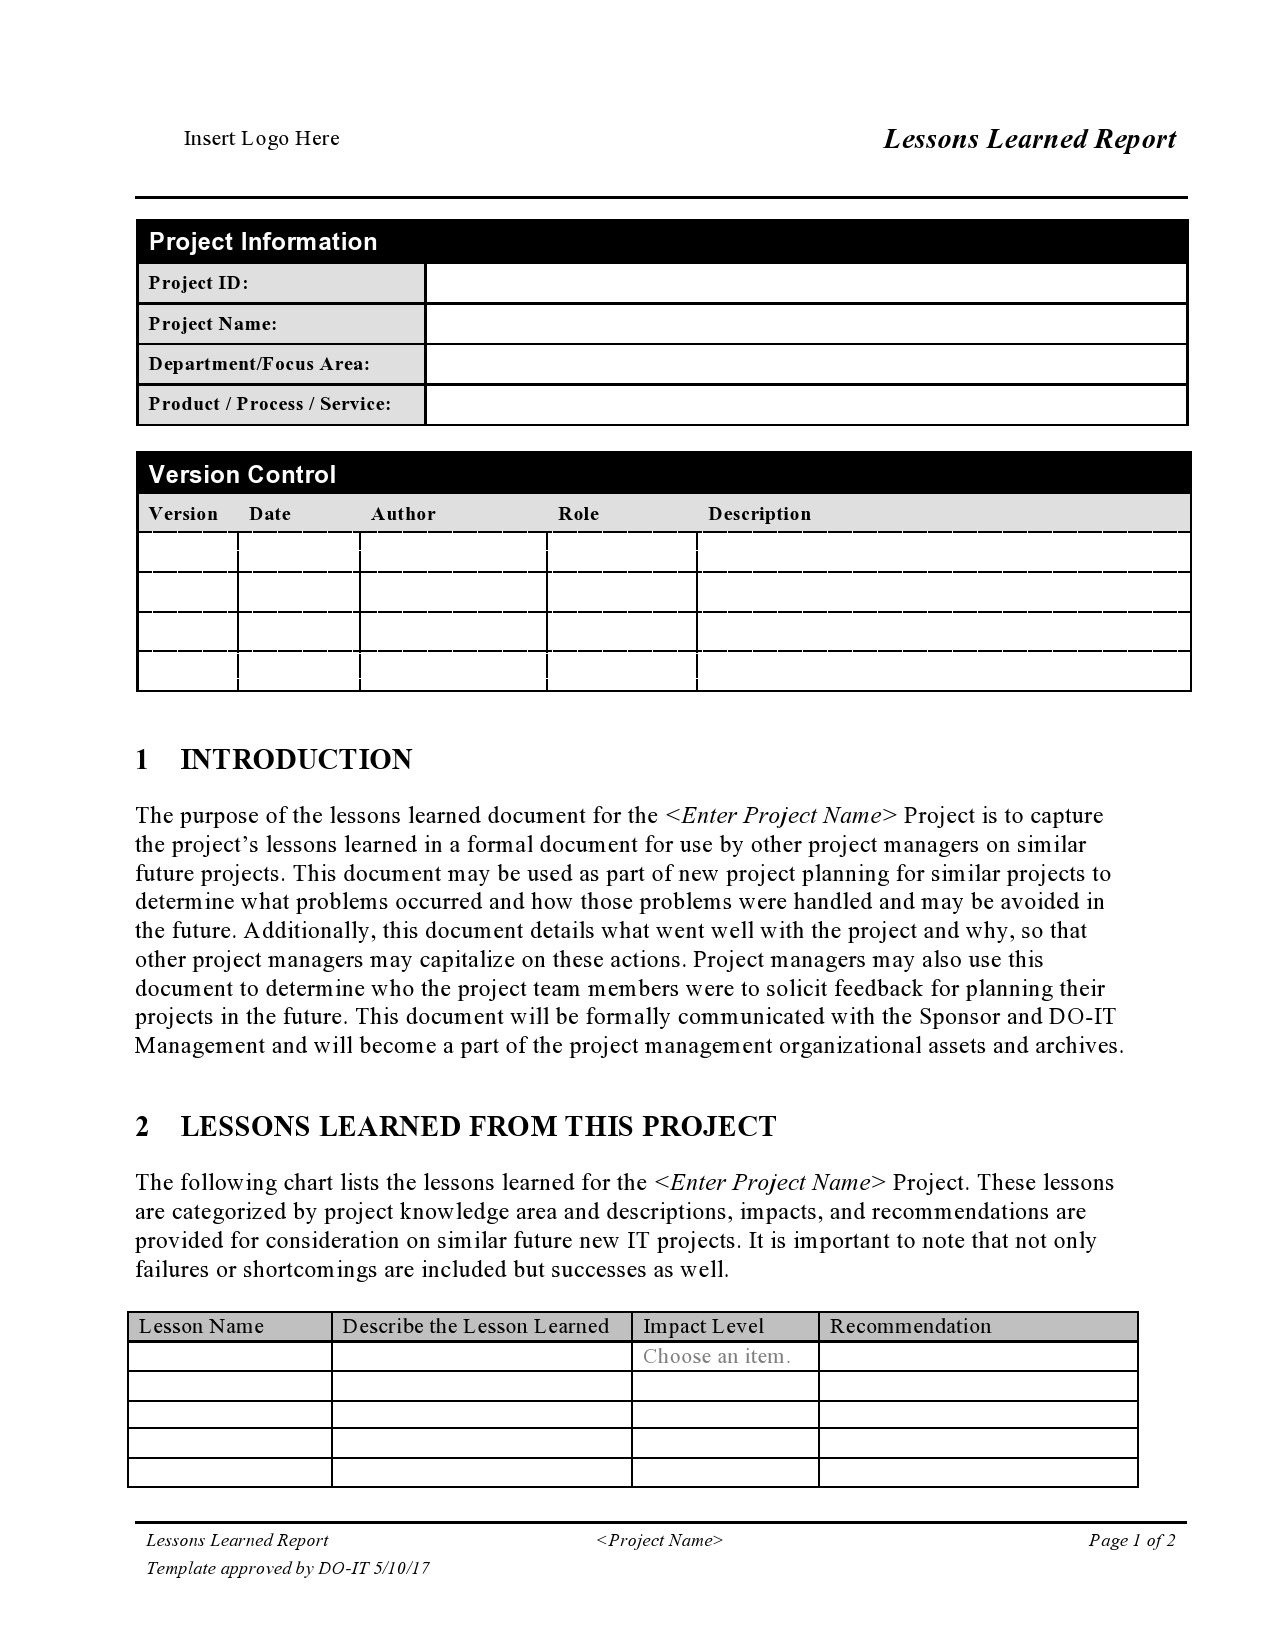 21 Best Lessons Learned Templates [Excel, Word] ᐅ TemplateLab  NCGo Intended For Lessons Learnt Report Template